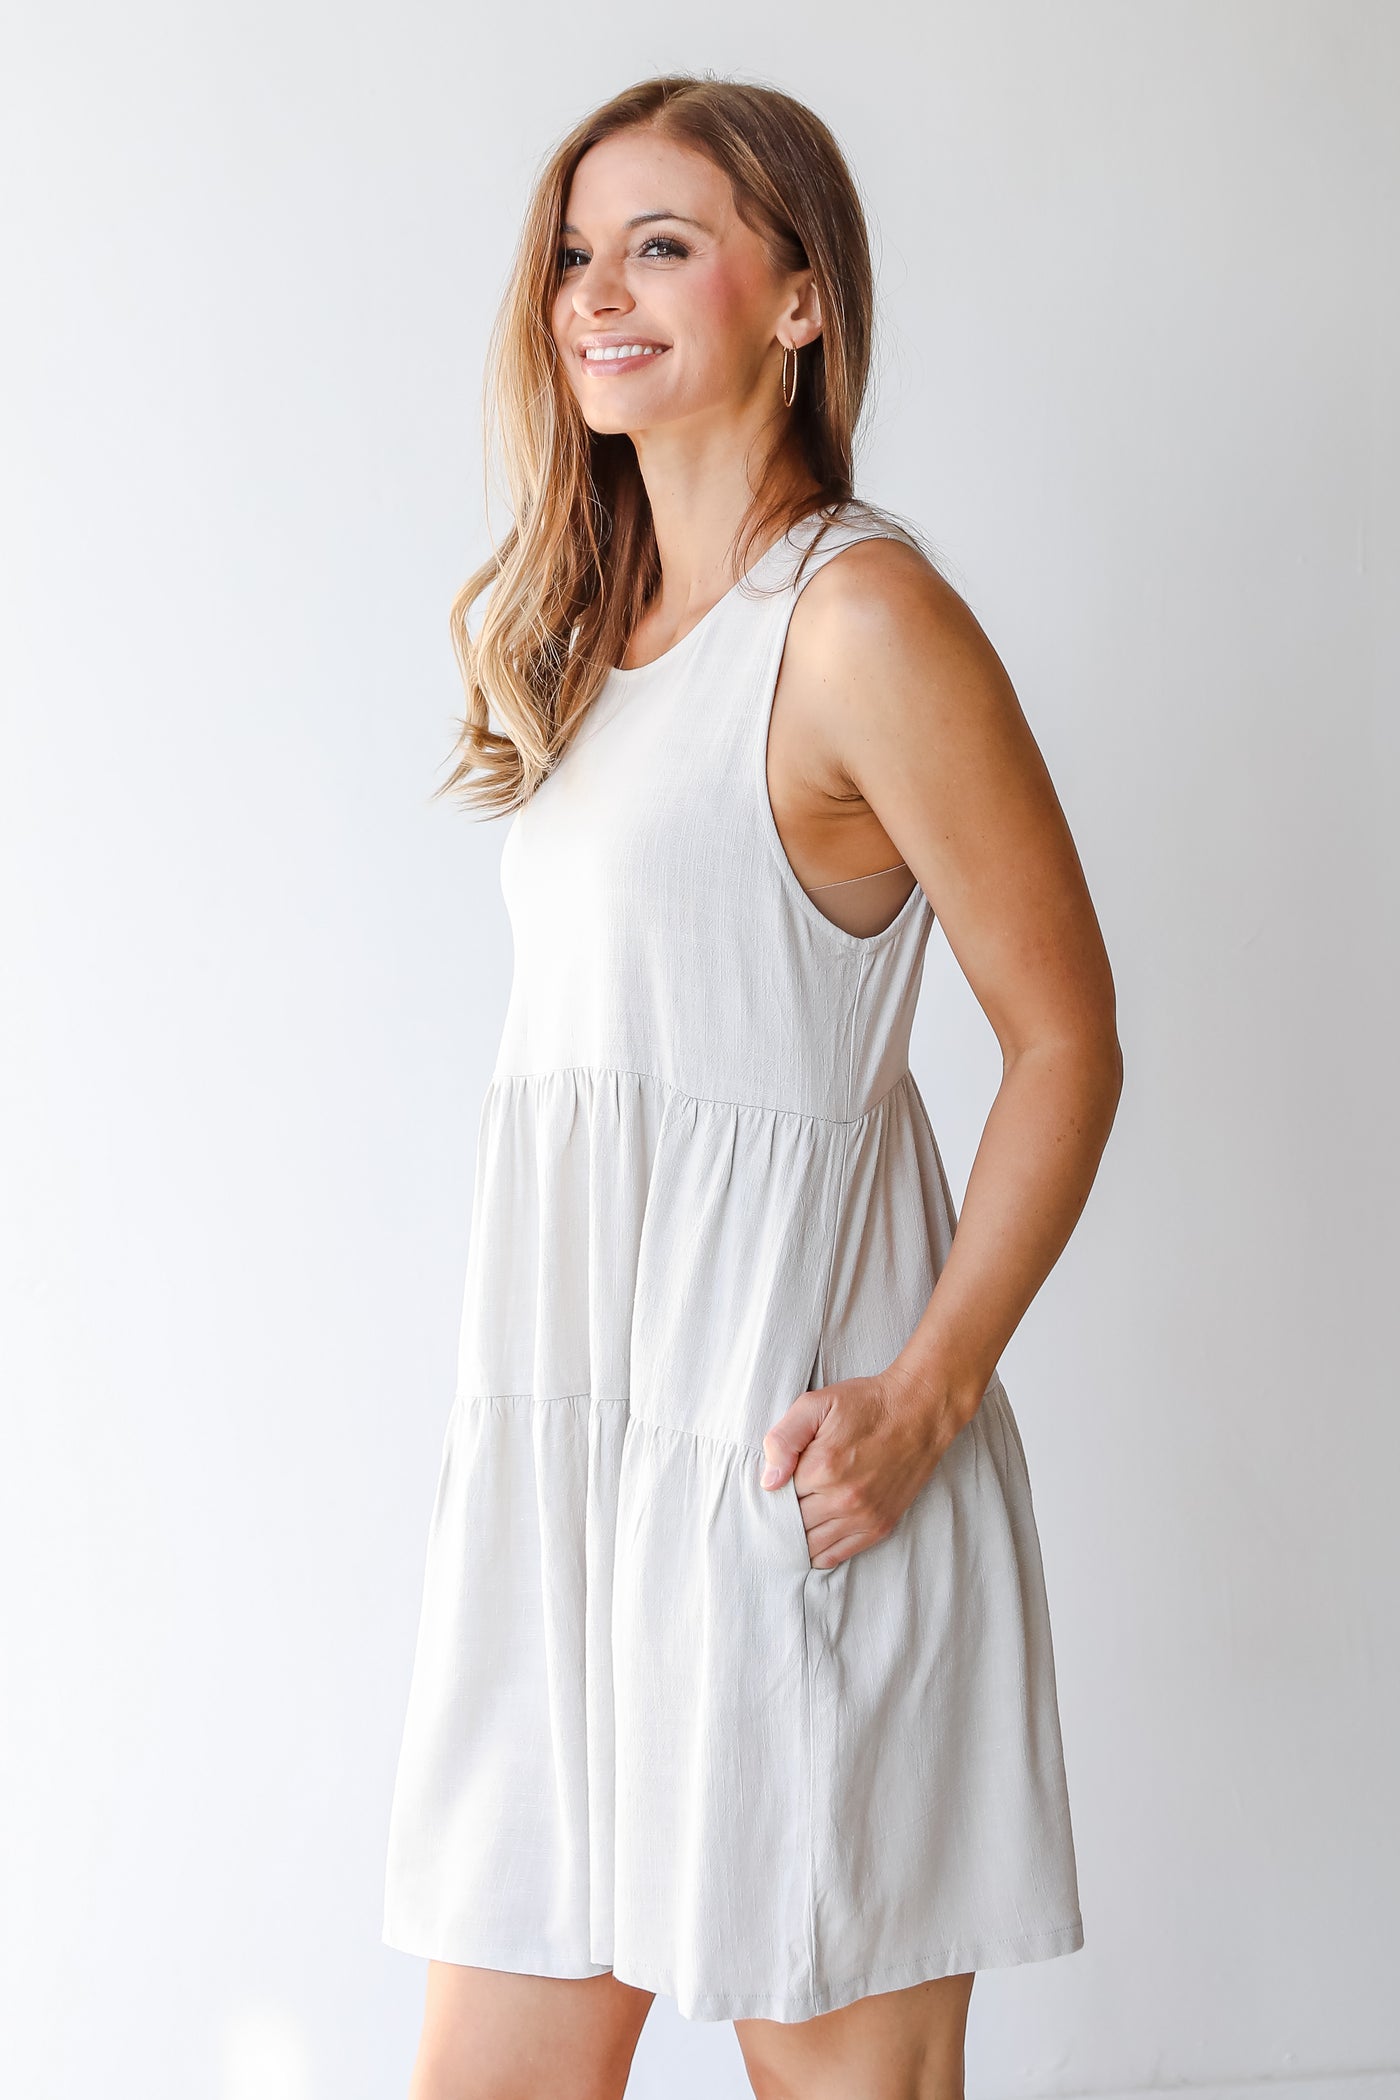 Linen Tiered Mini Dress in grey side view